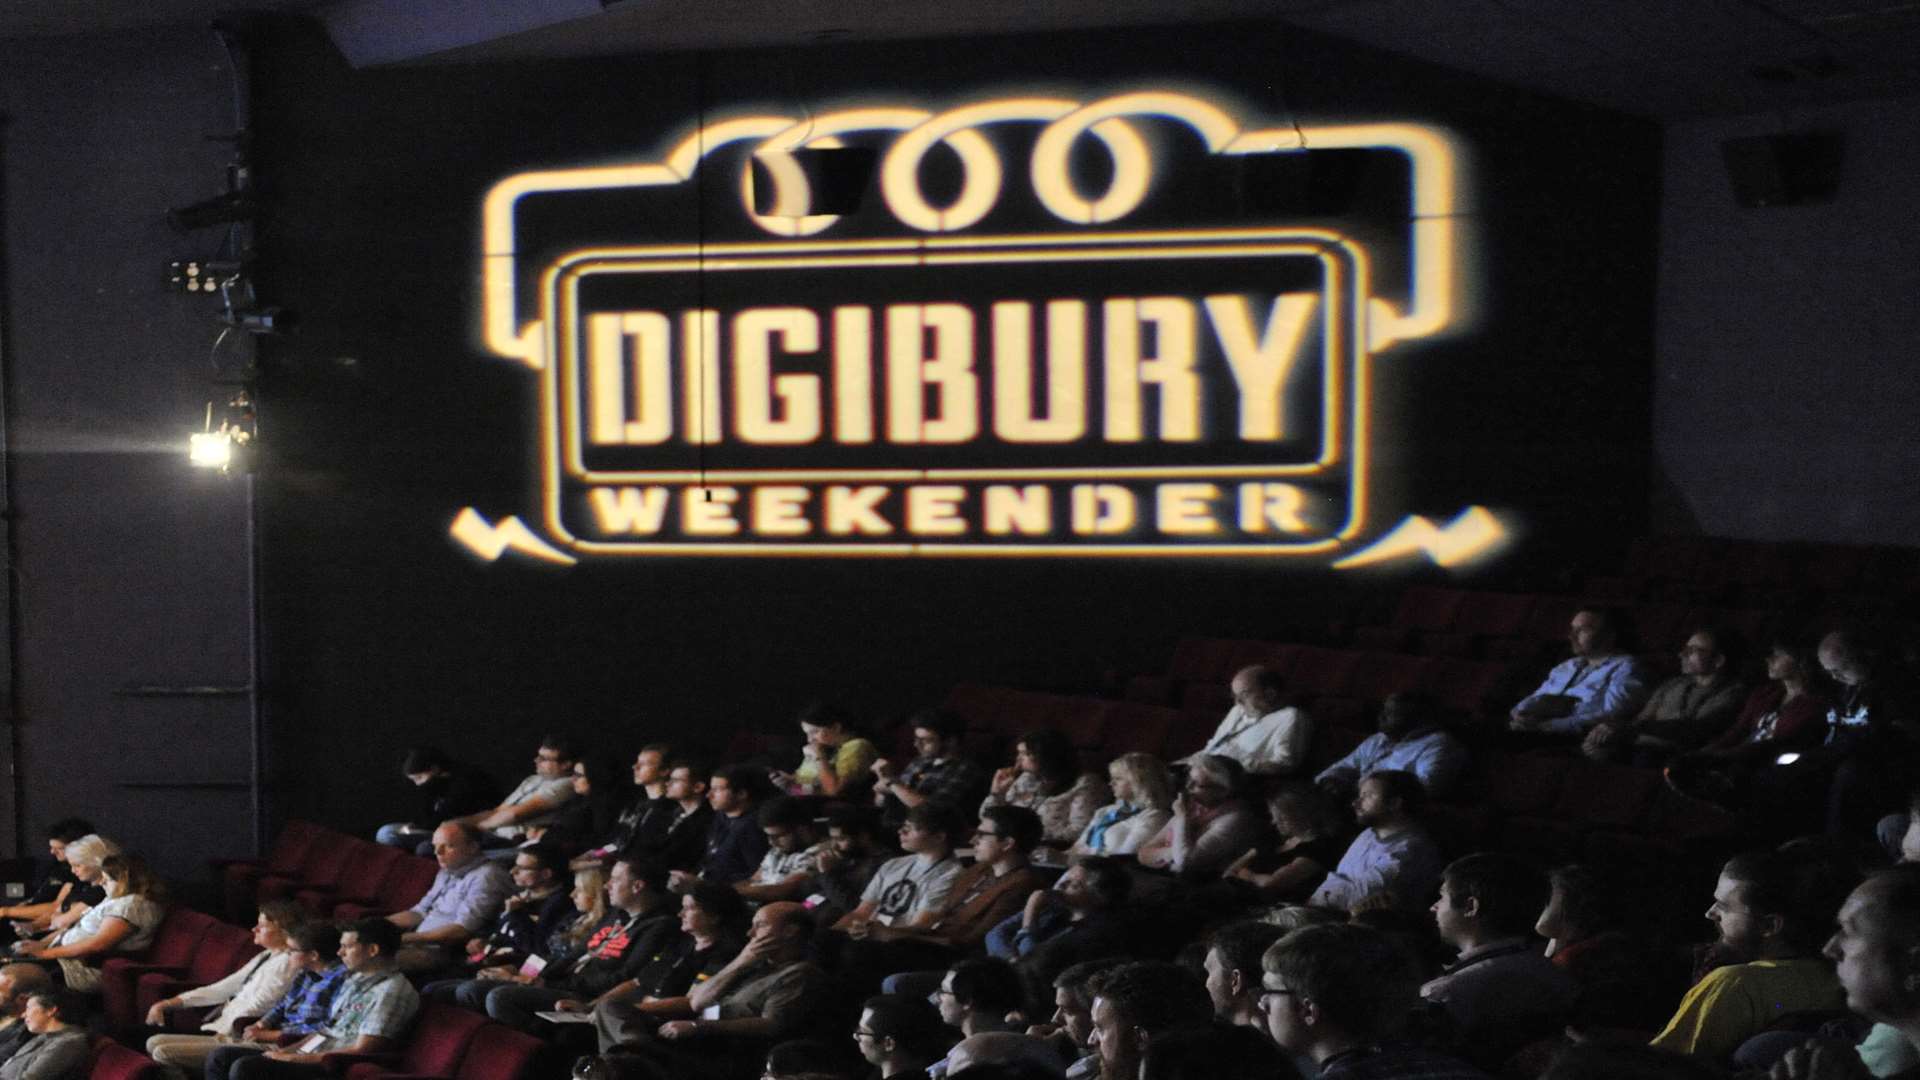 The Digibury Weekender at the Gulbenkian